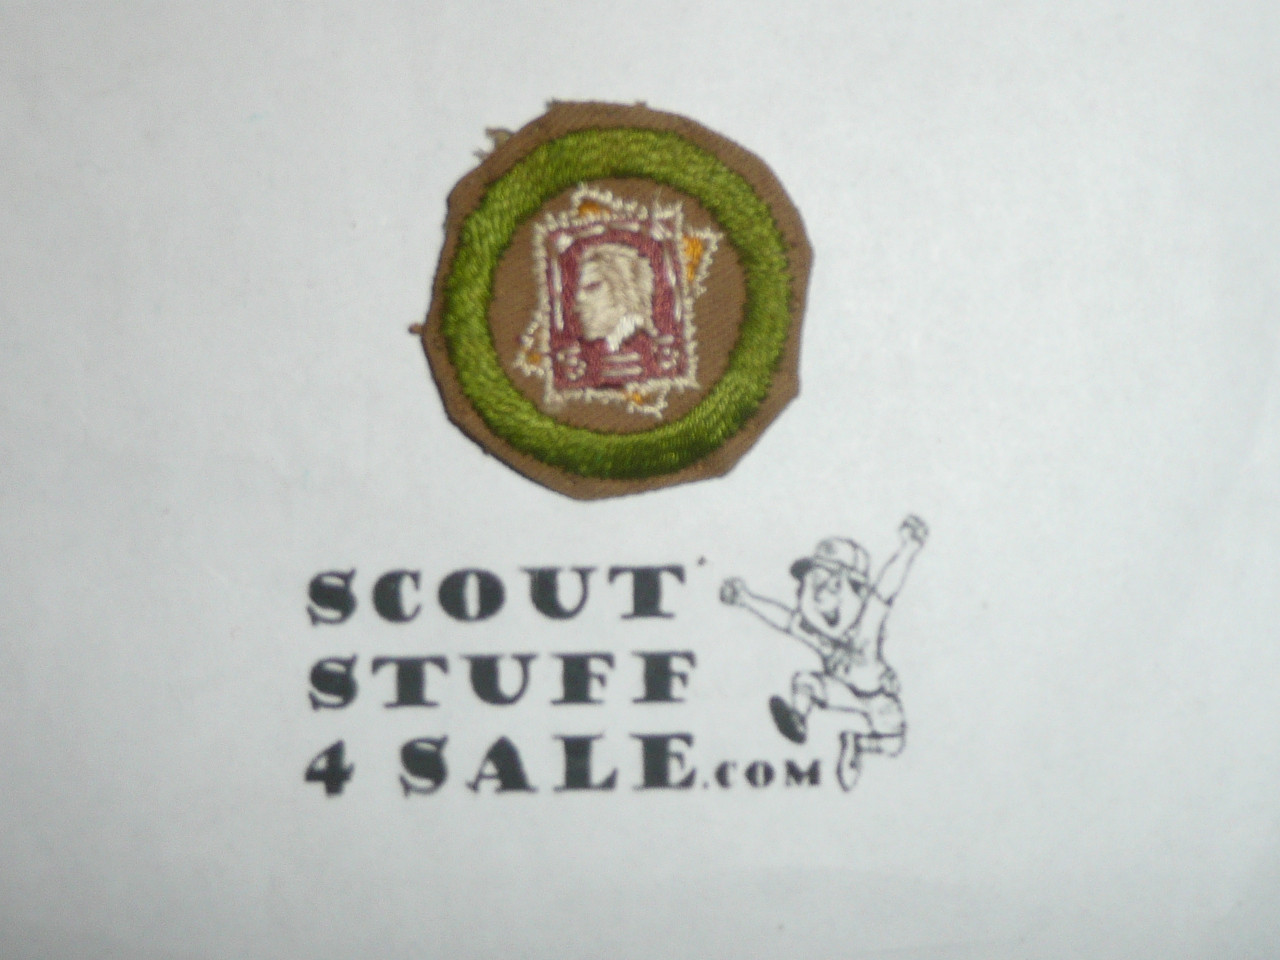 Stamp Collecting - Type D - Fine Twill Merit Badge (1942-1946), litely used